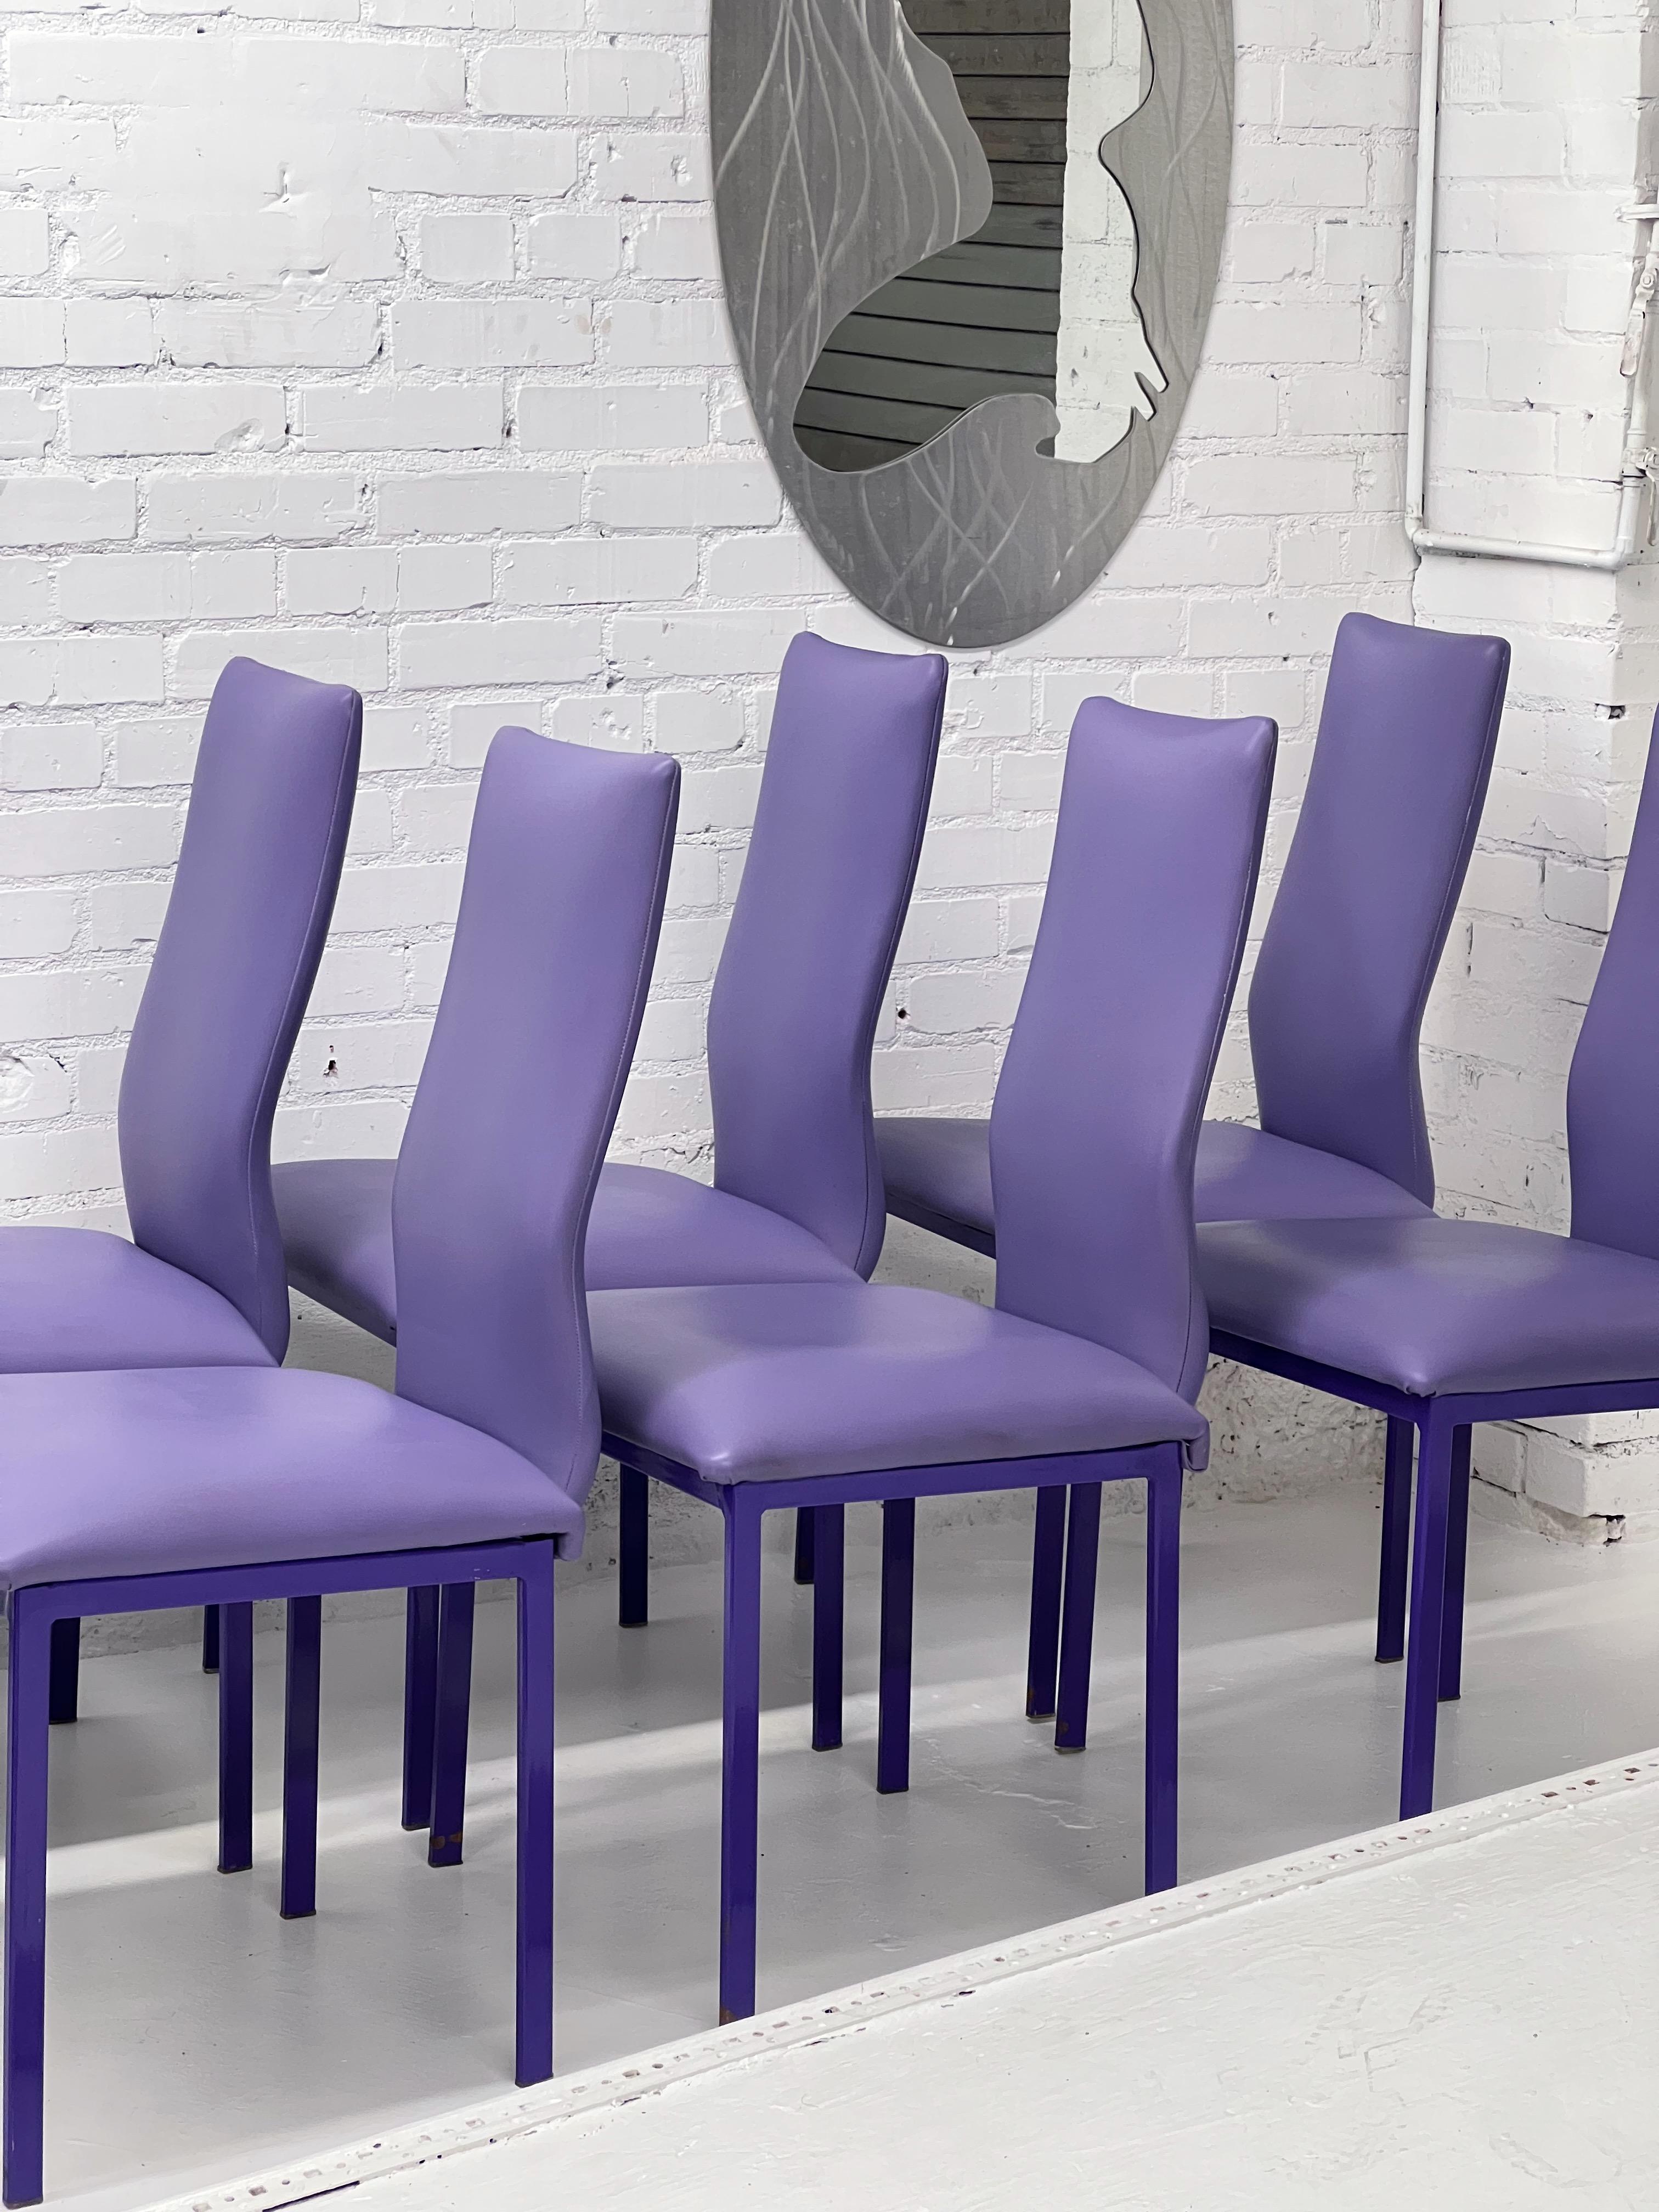 Post-Modern Minson Corp. Postmodern Sculptural Lavender Purple Chairs - Set of 6 For Sale